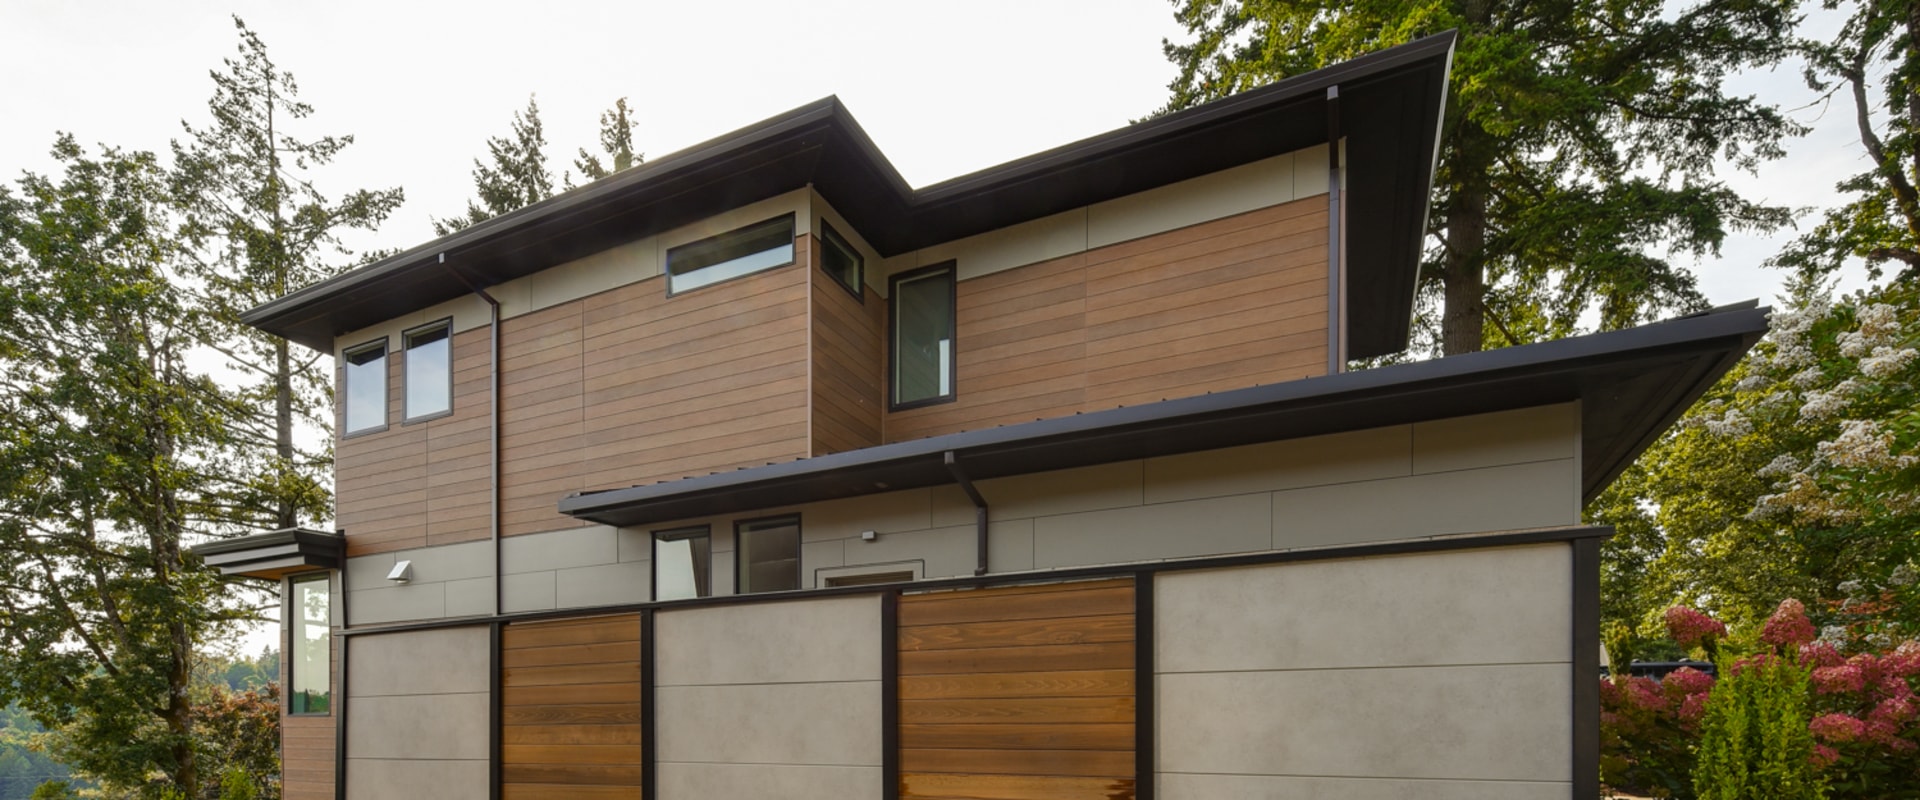 The Best Long-Lasting Roofing and Siding Options for Your Home